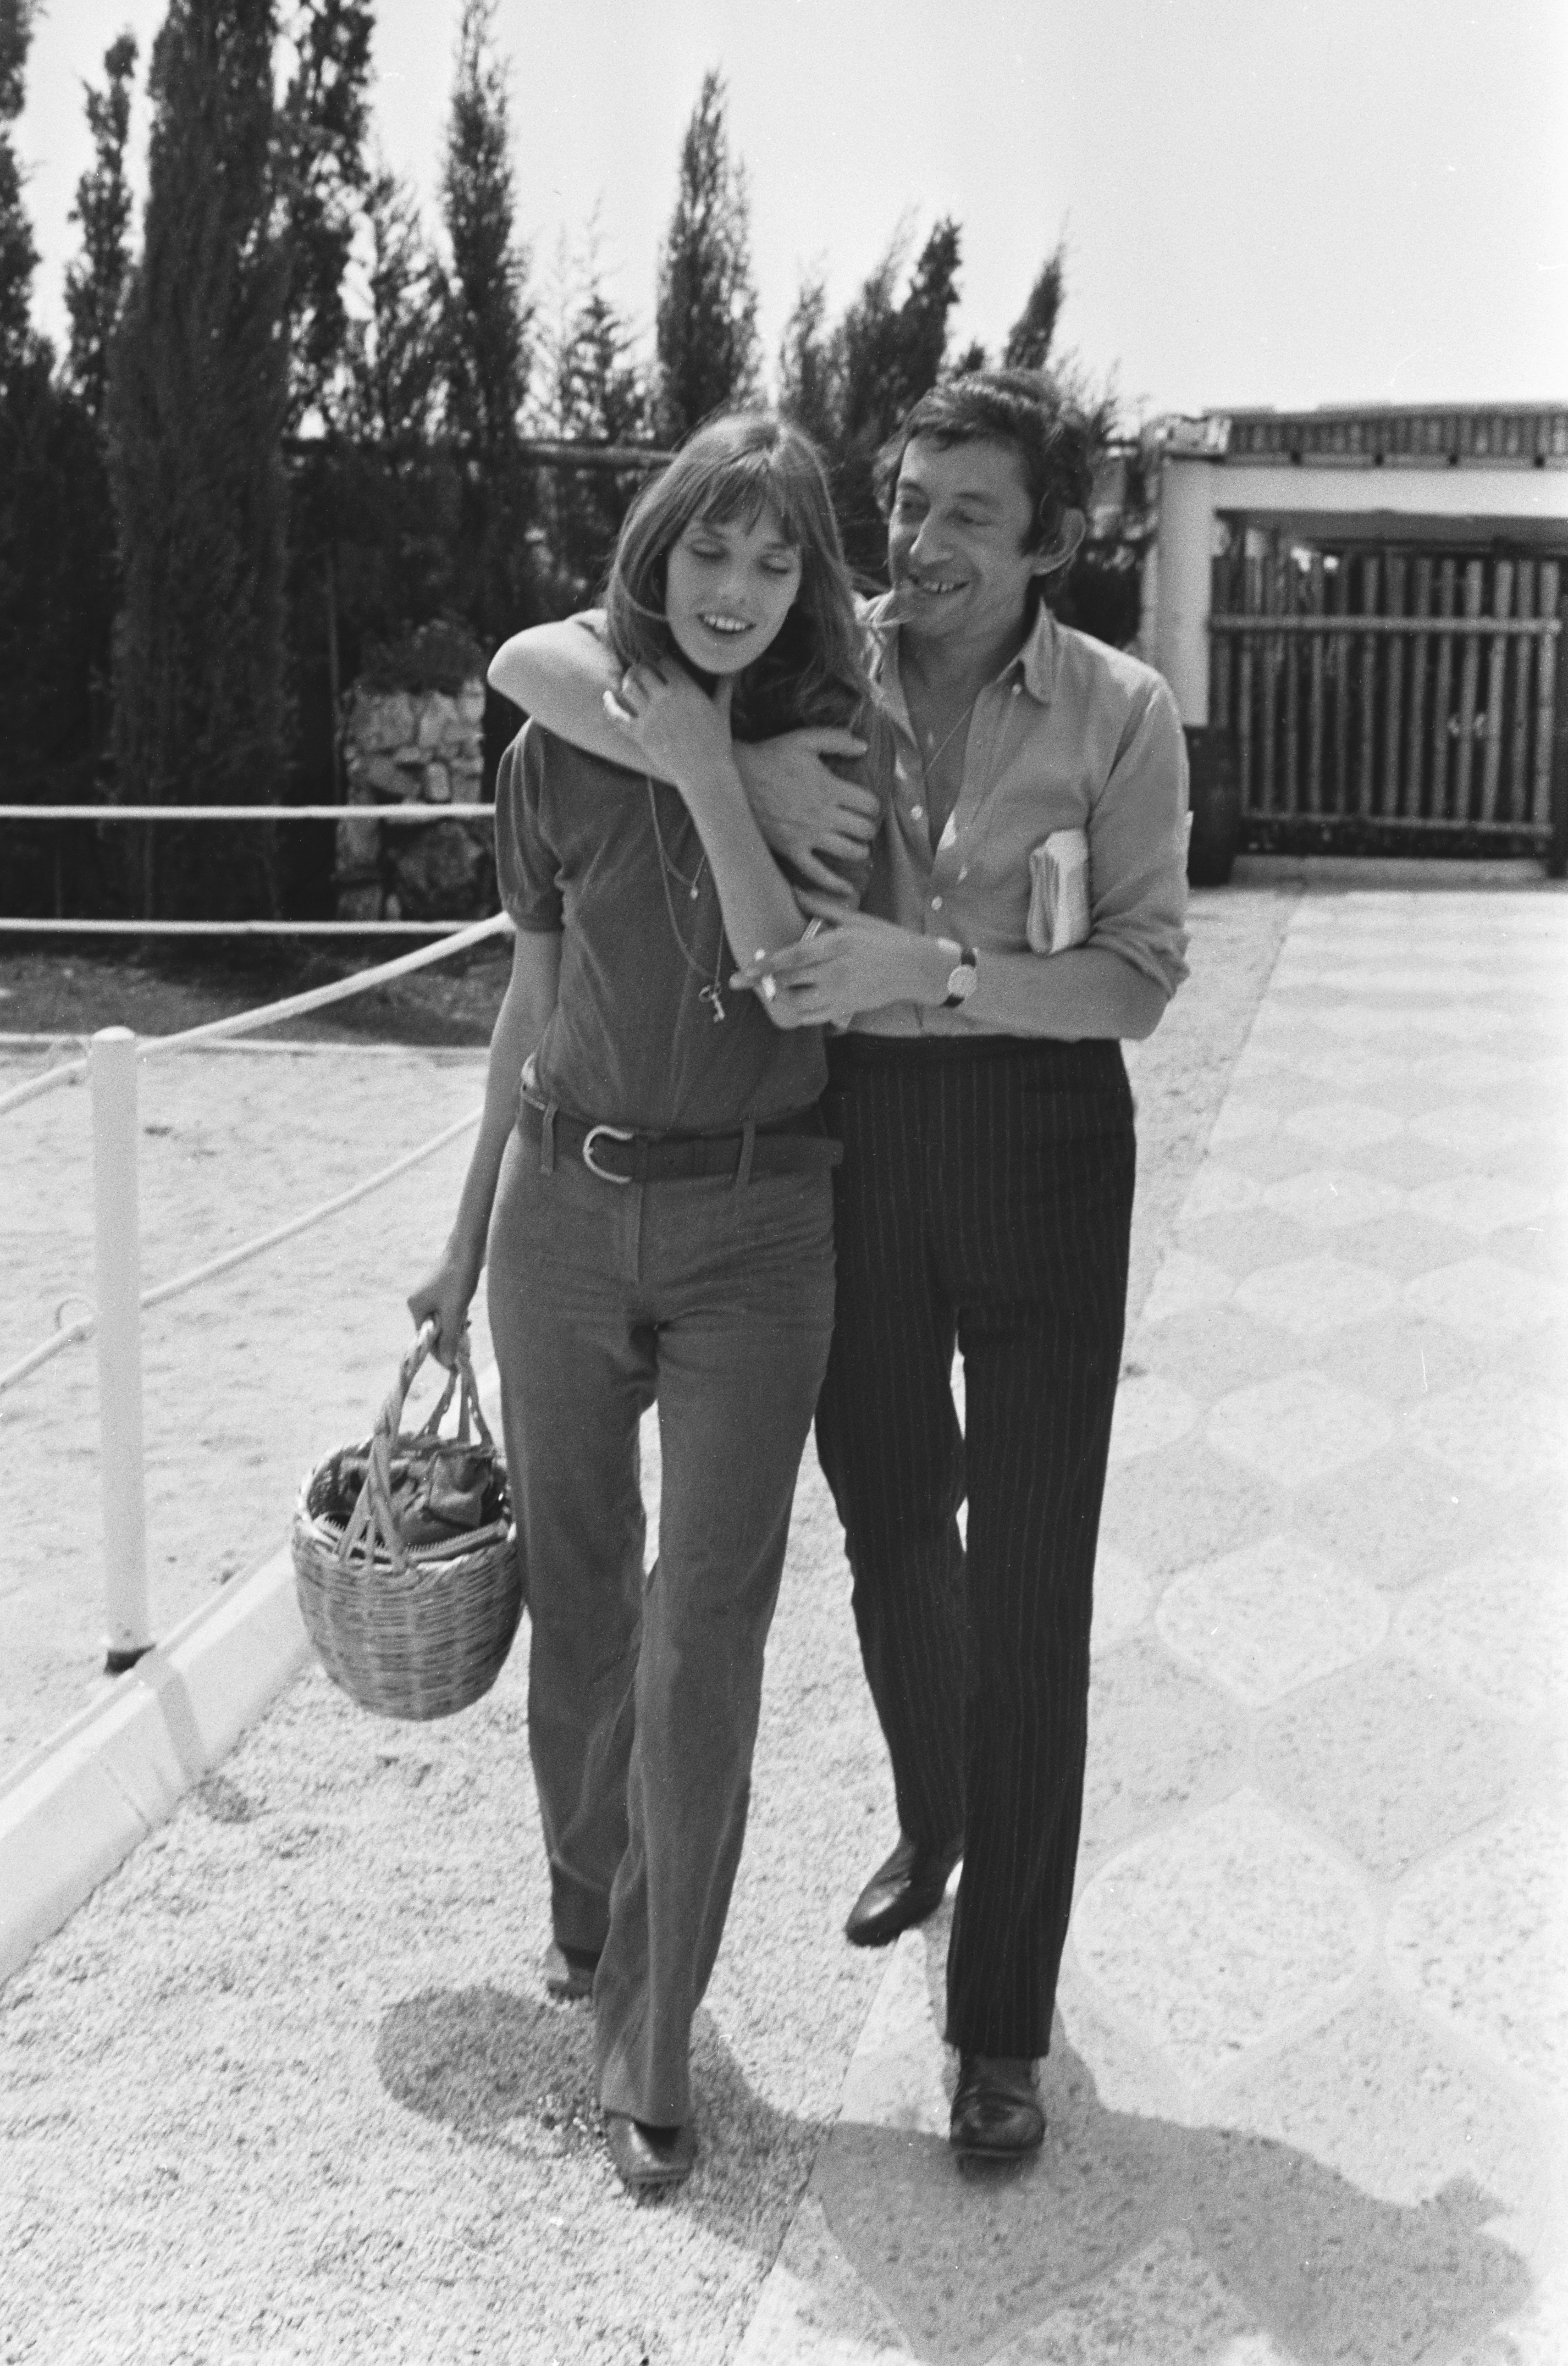 Jane Birkin on Serge Gainsbourg and Paris in the 70s